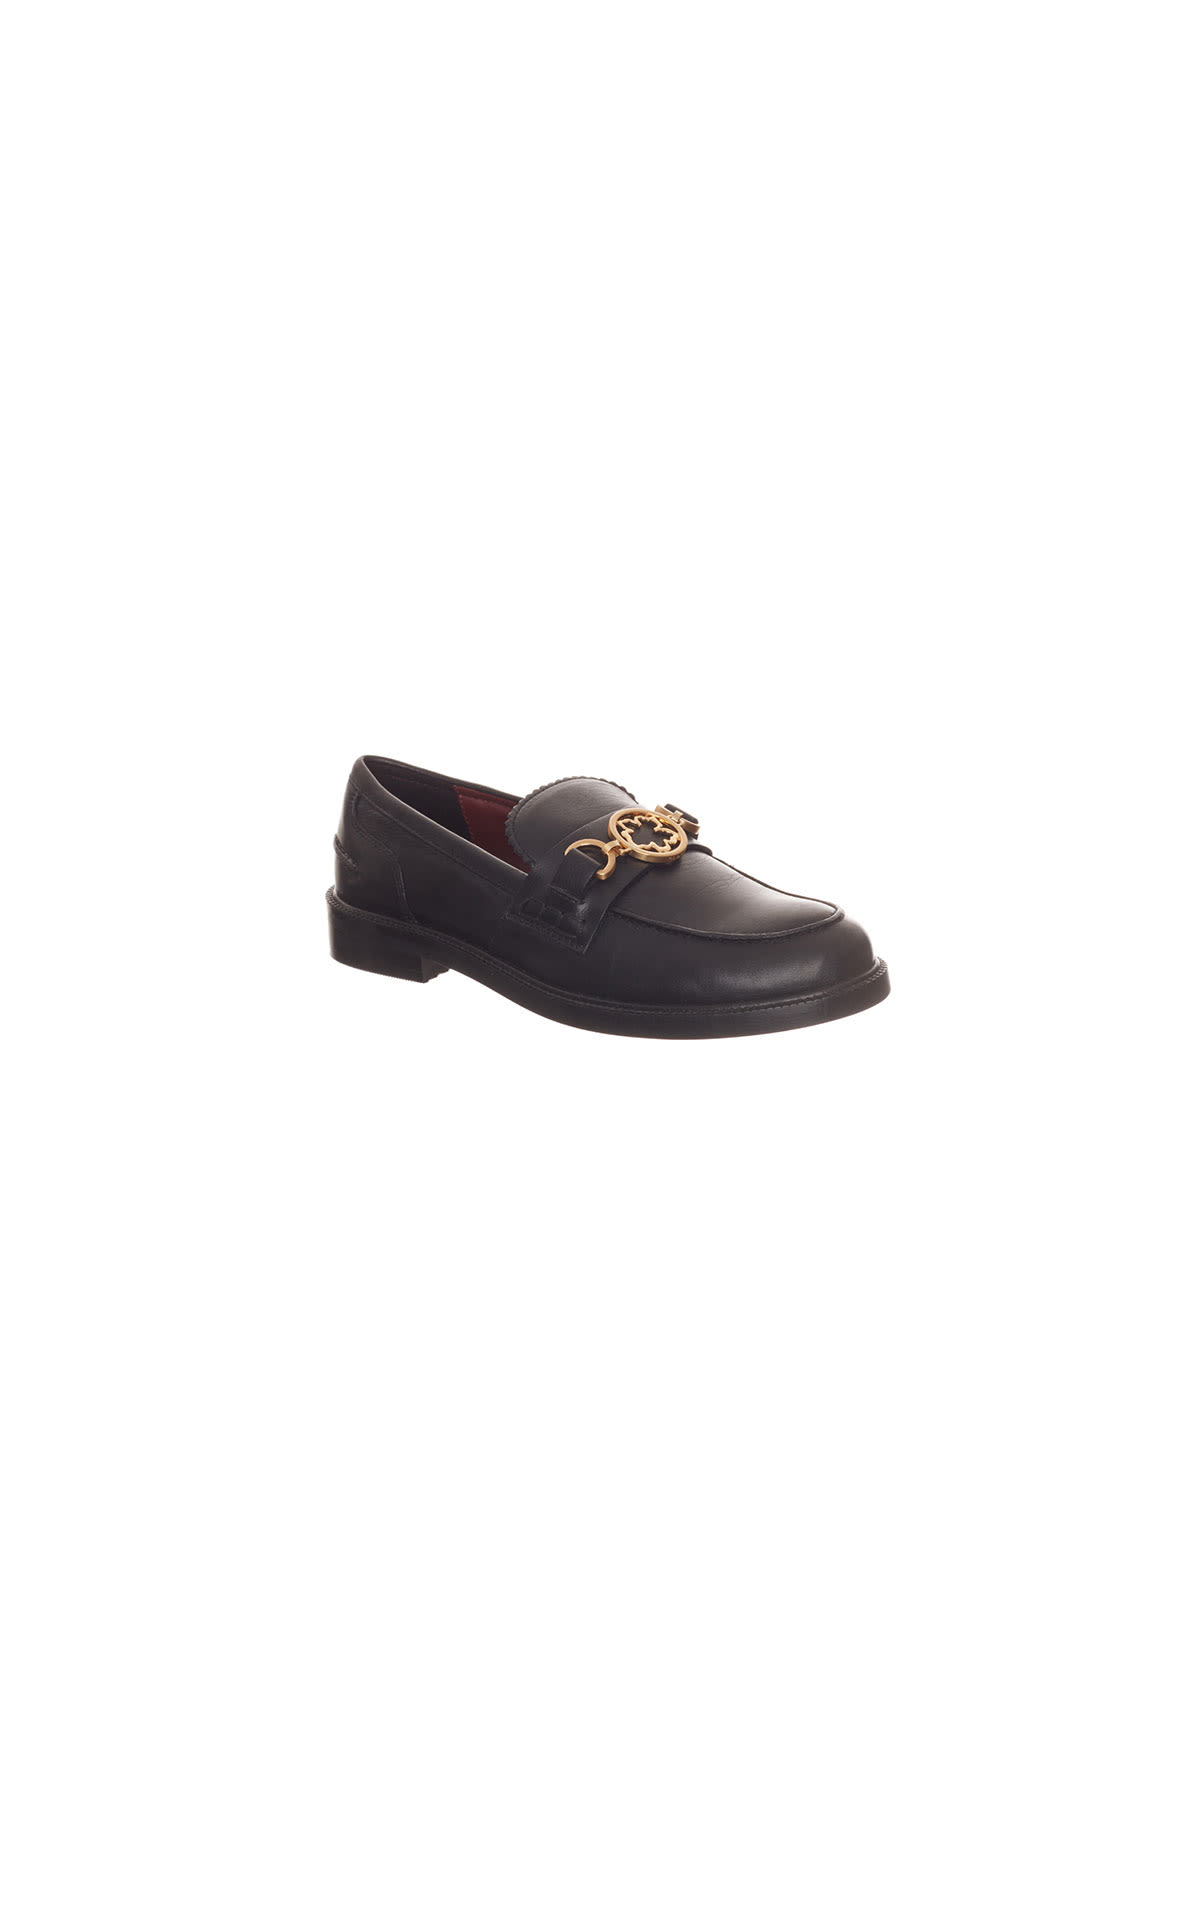 Ted Baker Magnolia leather_loafers from Bicester Village